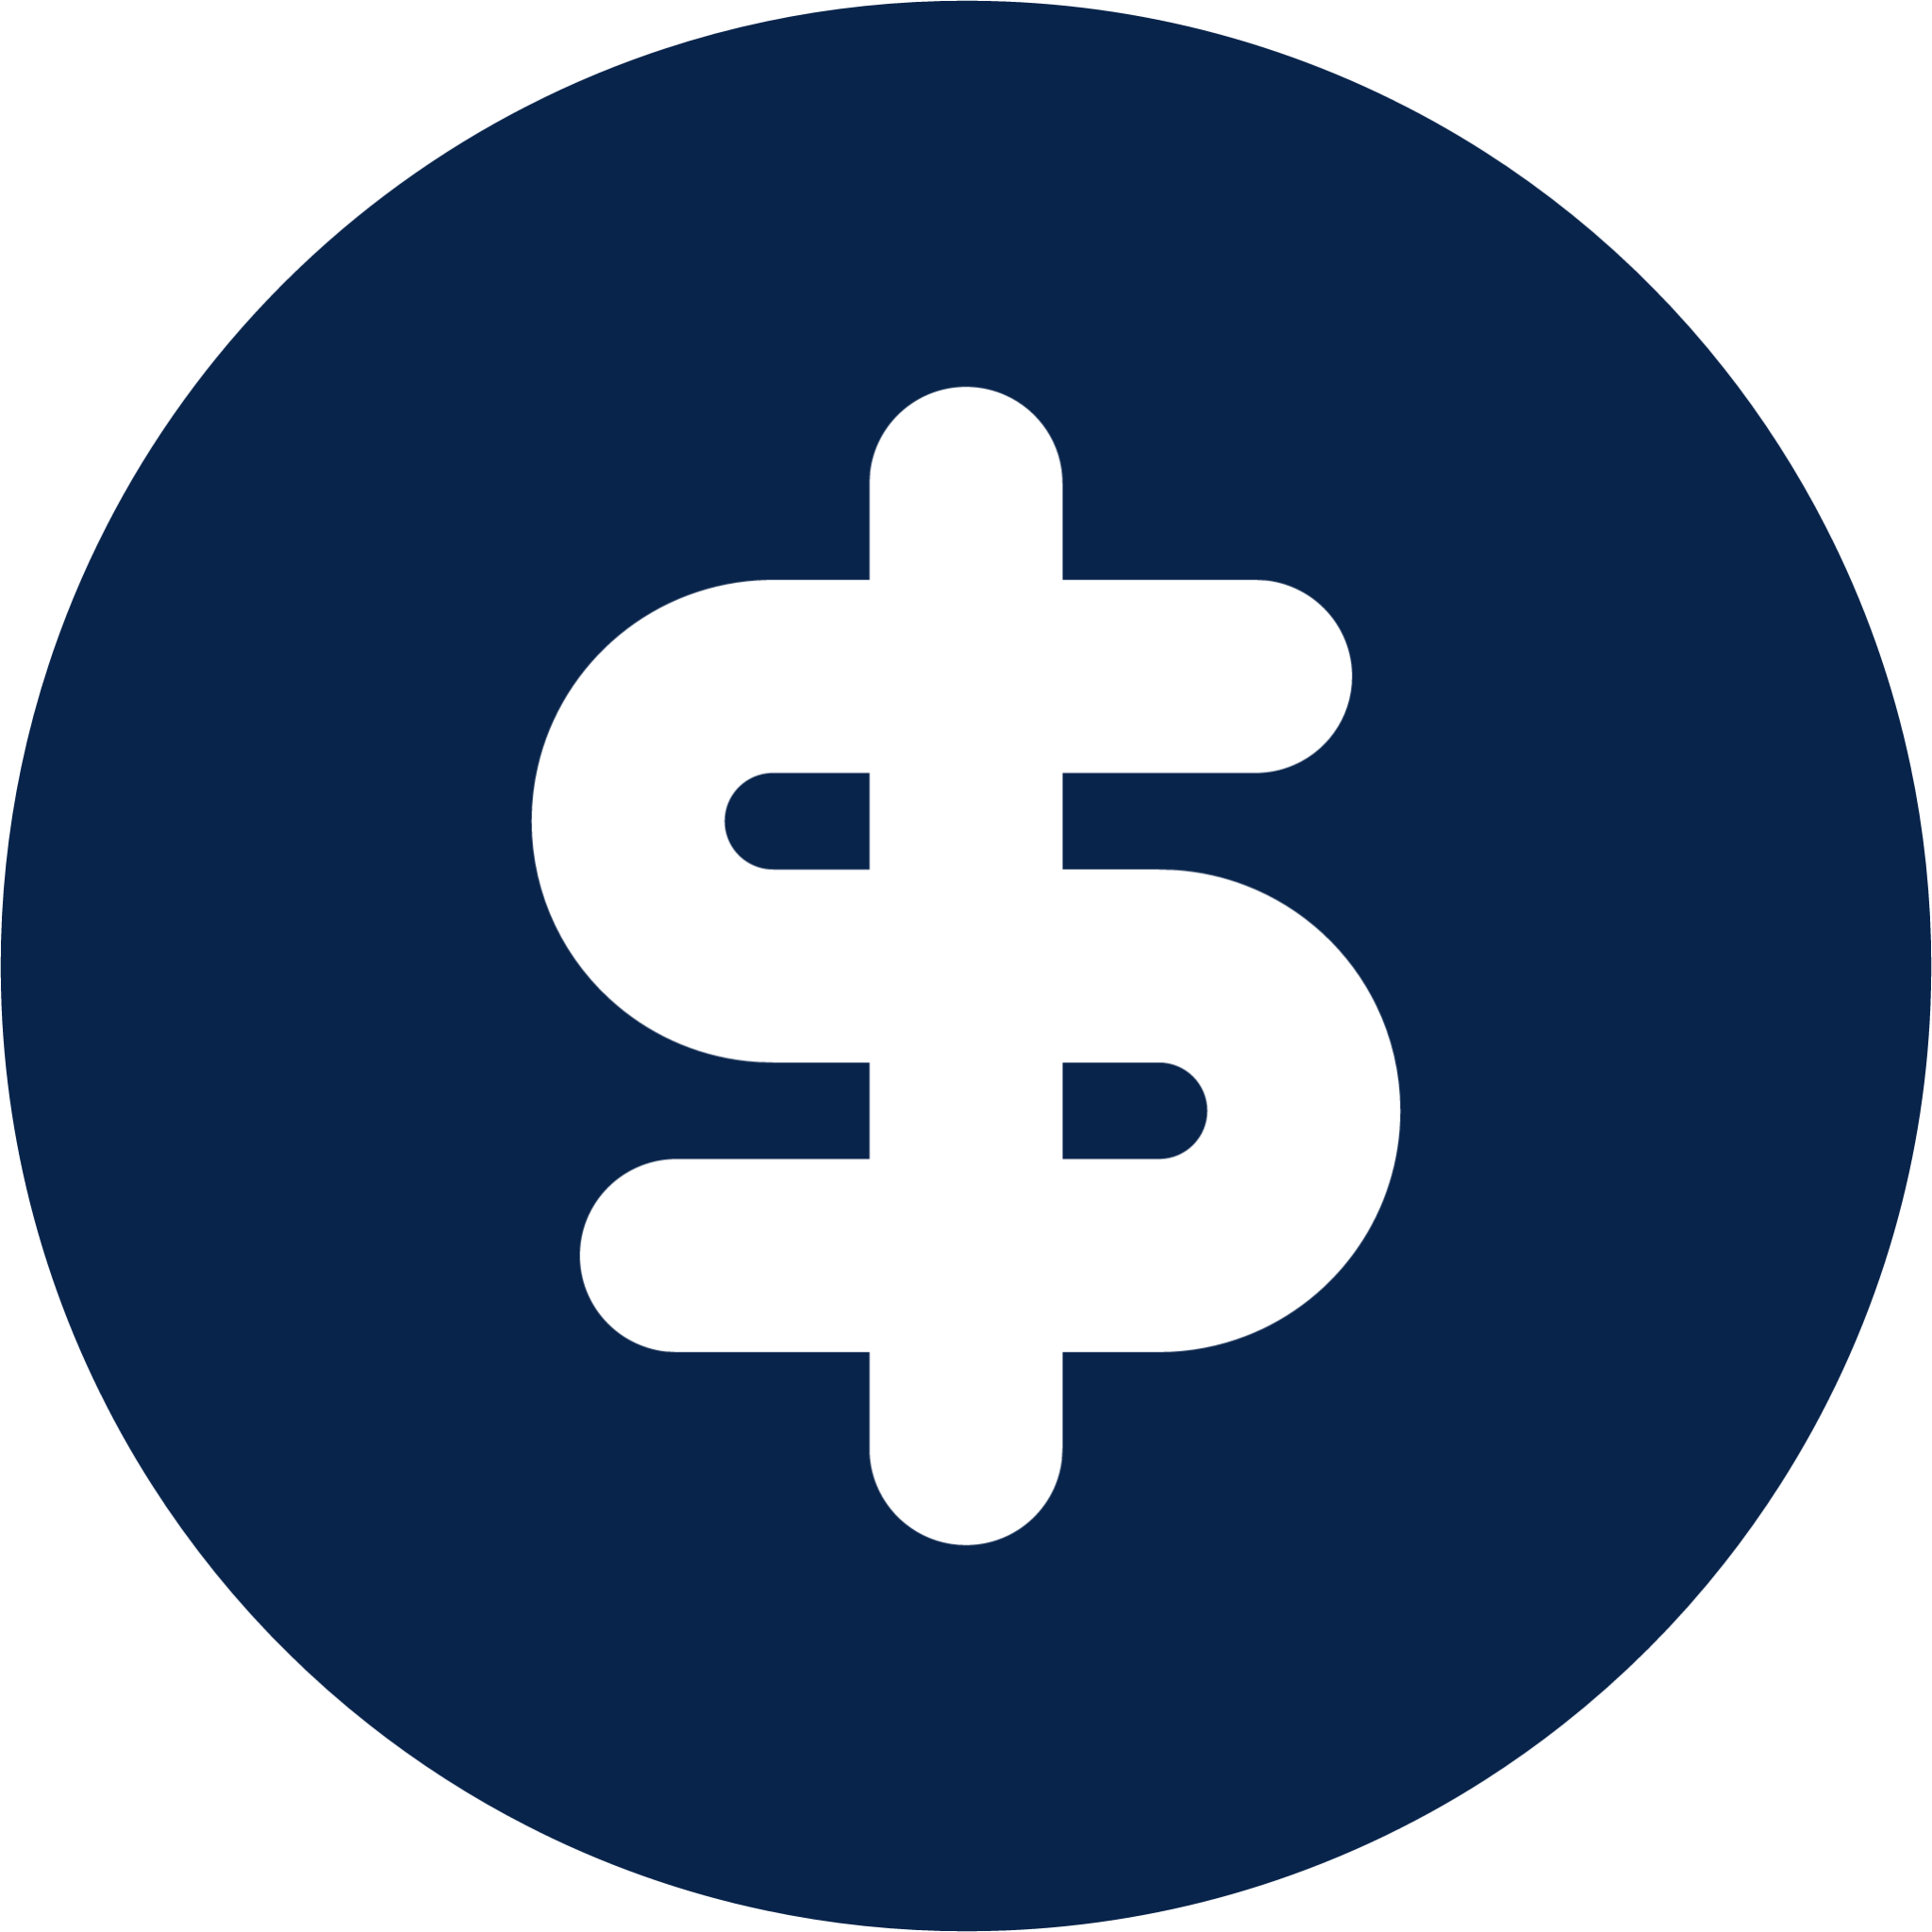 currency dollar fill business icon